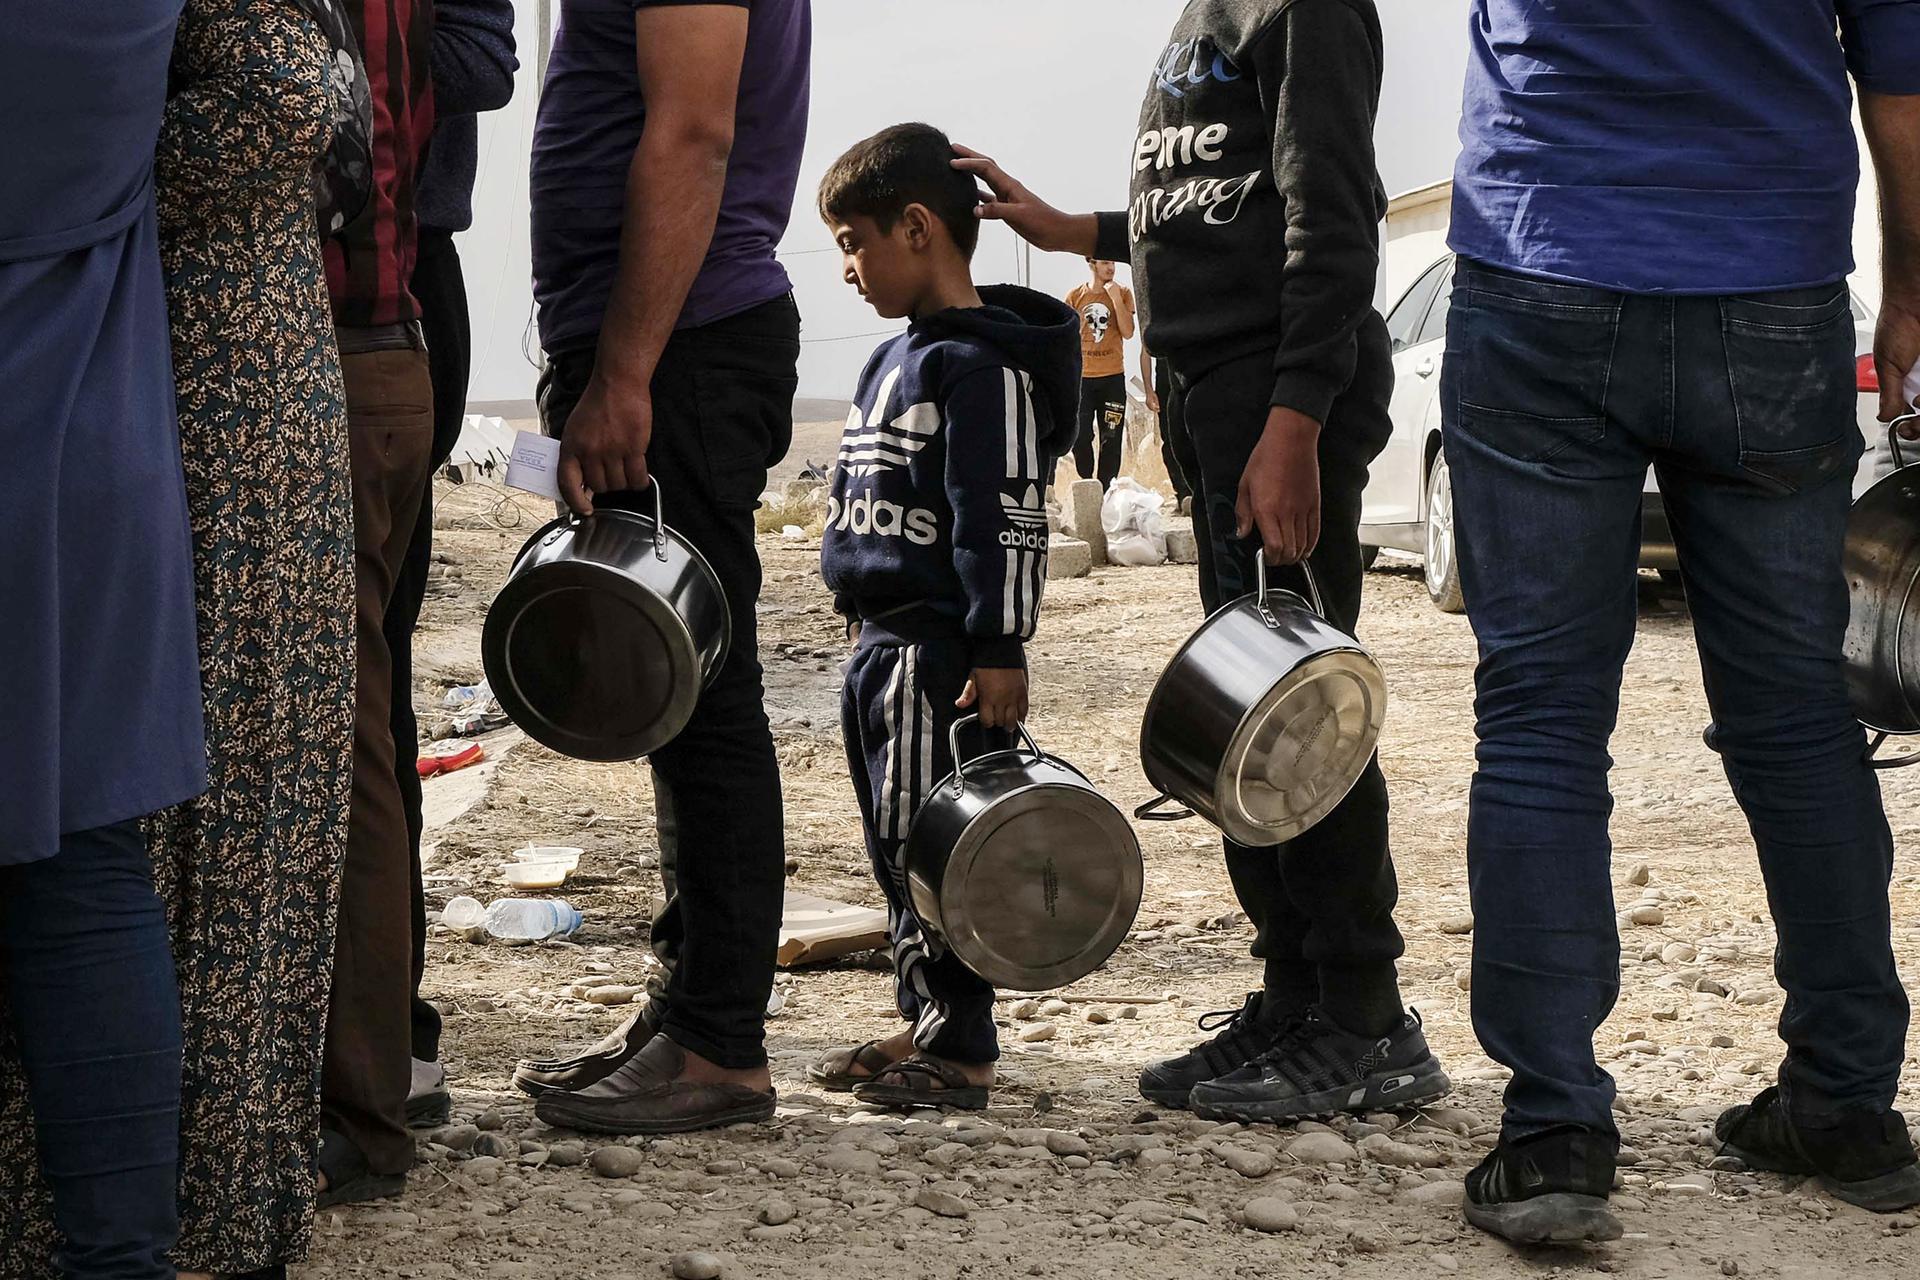 DOHUK, IRAQ - OCTOBER 17: (EDITOR'S NOTE: Alternate crop of #1176332462 ) Syrian refugees fleeing the Turkish incursion in Northern Syria wait to receive water, bread and lentil soup as more than 200 arrive at the Bardarash IDP camp on October 17, 2019 in Dohuk, Iraq. More than 1000 refugees have arrived in Northern Iraq since the beginning of the conflict, with many saying they paid to be smuggled through the Syrian border. (Photo by Byron Smith/Getty Images) *** BESTPIX ***